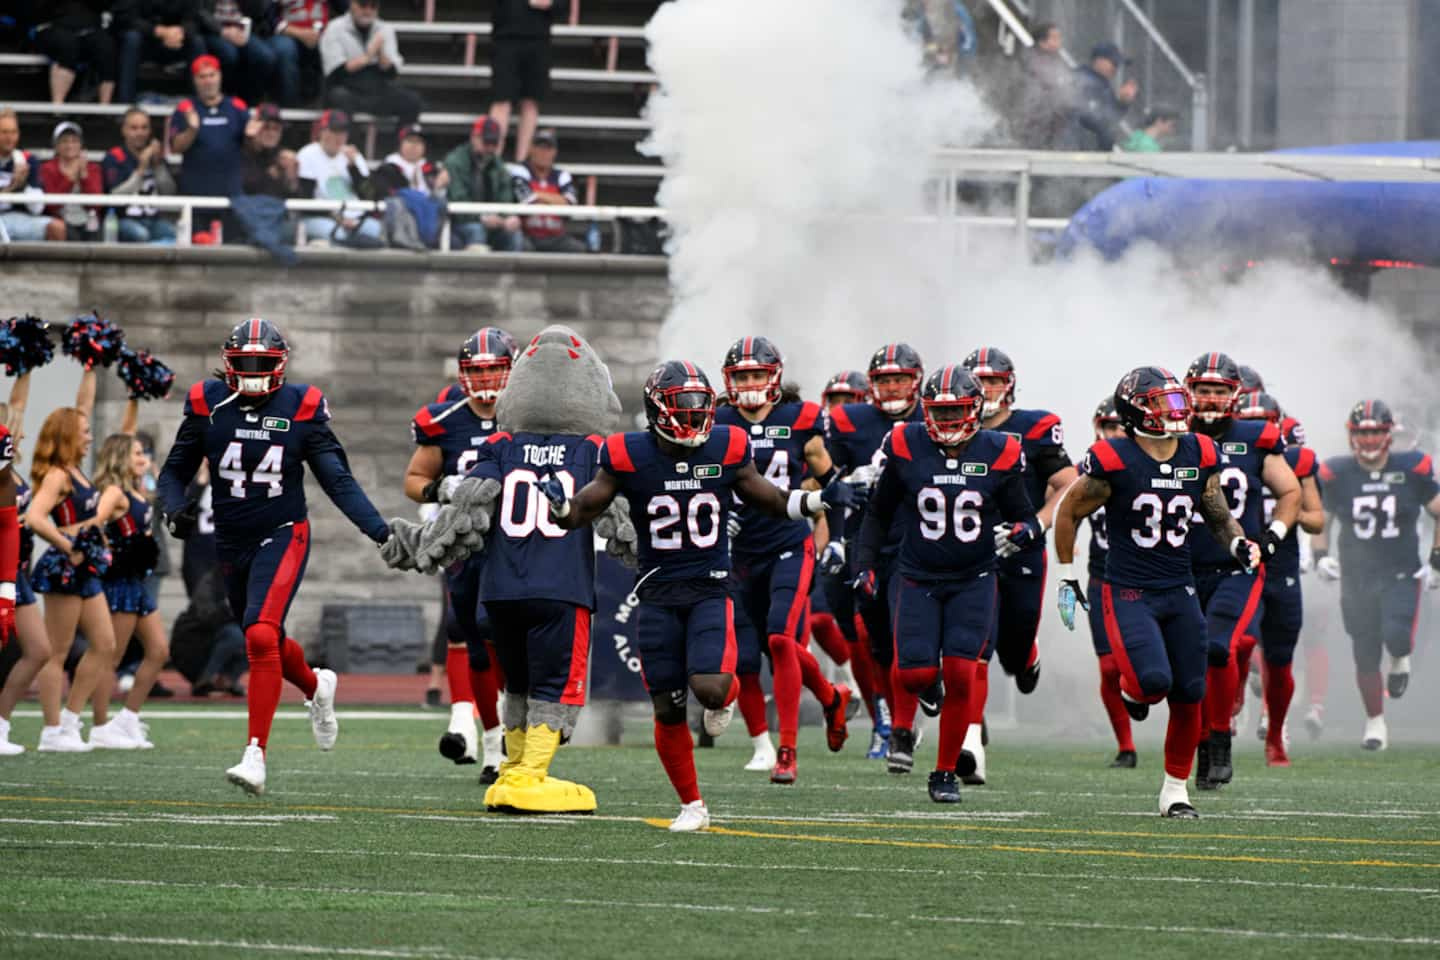 Resounding victory for the Alouettes at home